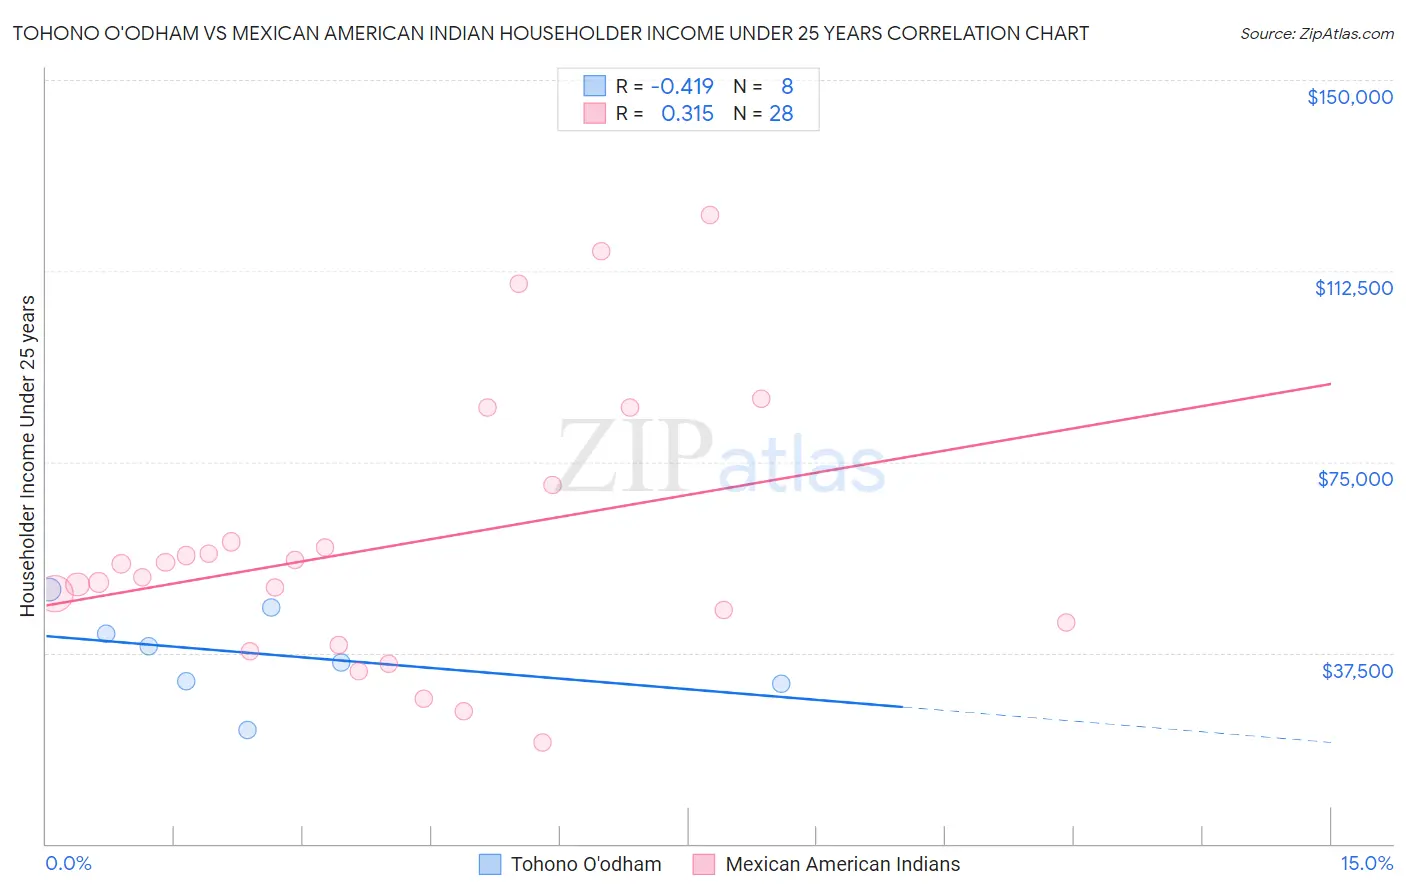 Tohono O'odham vs Mexican American Indian Householder Income Under 25 years